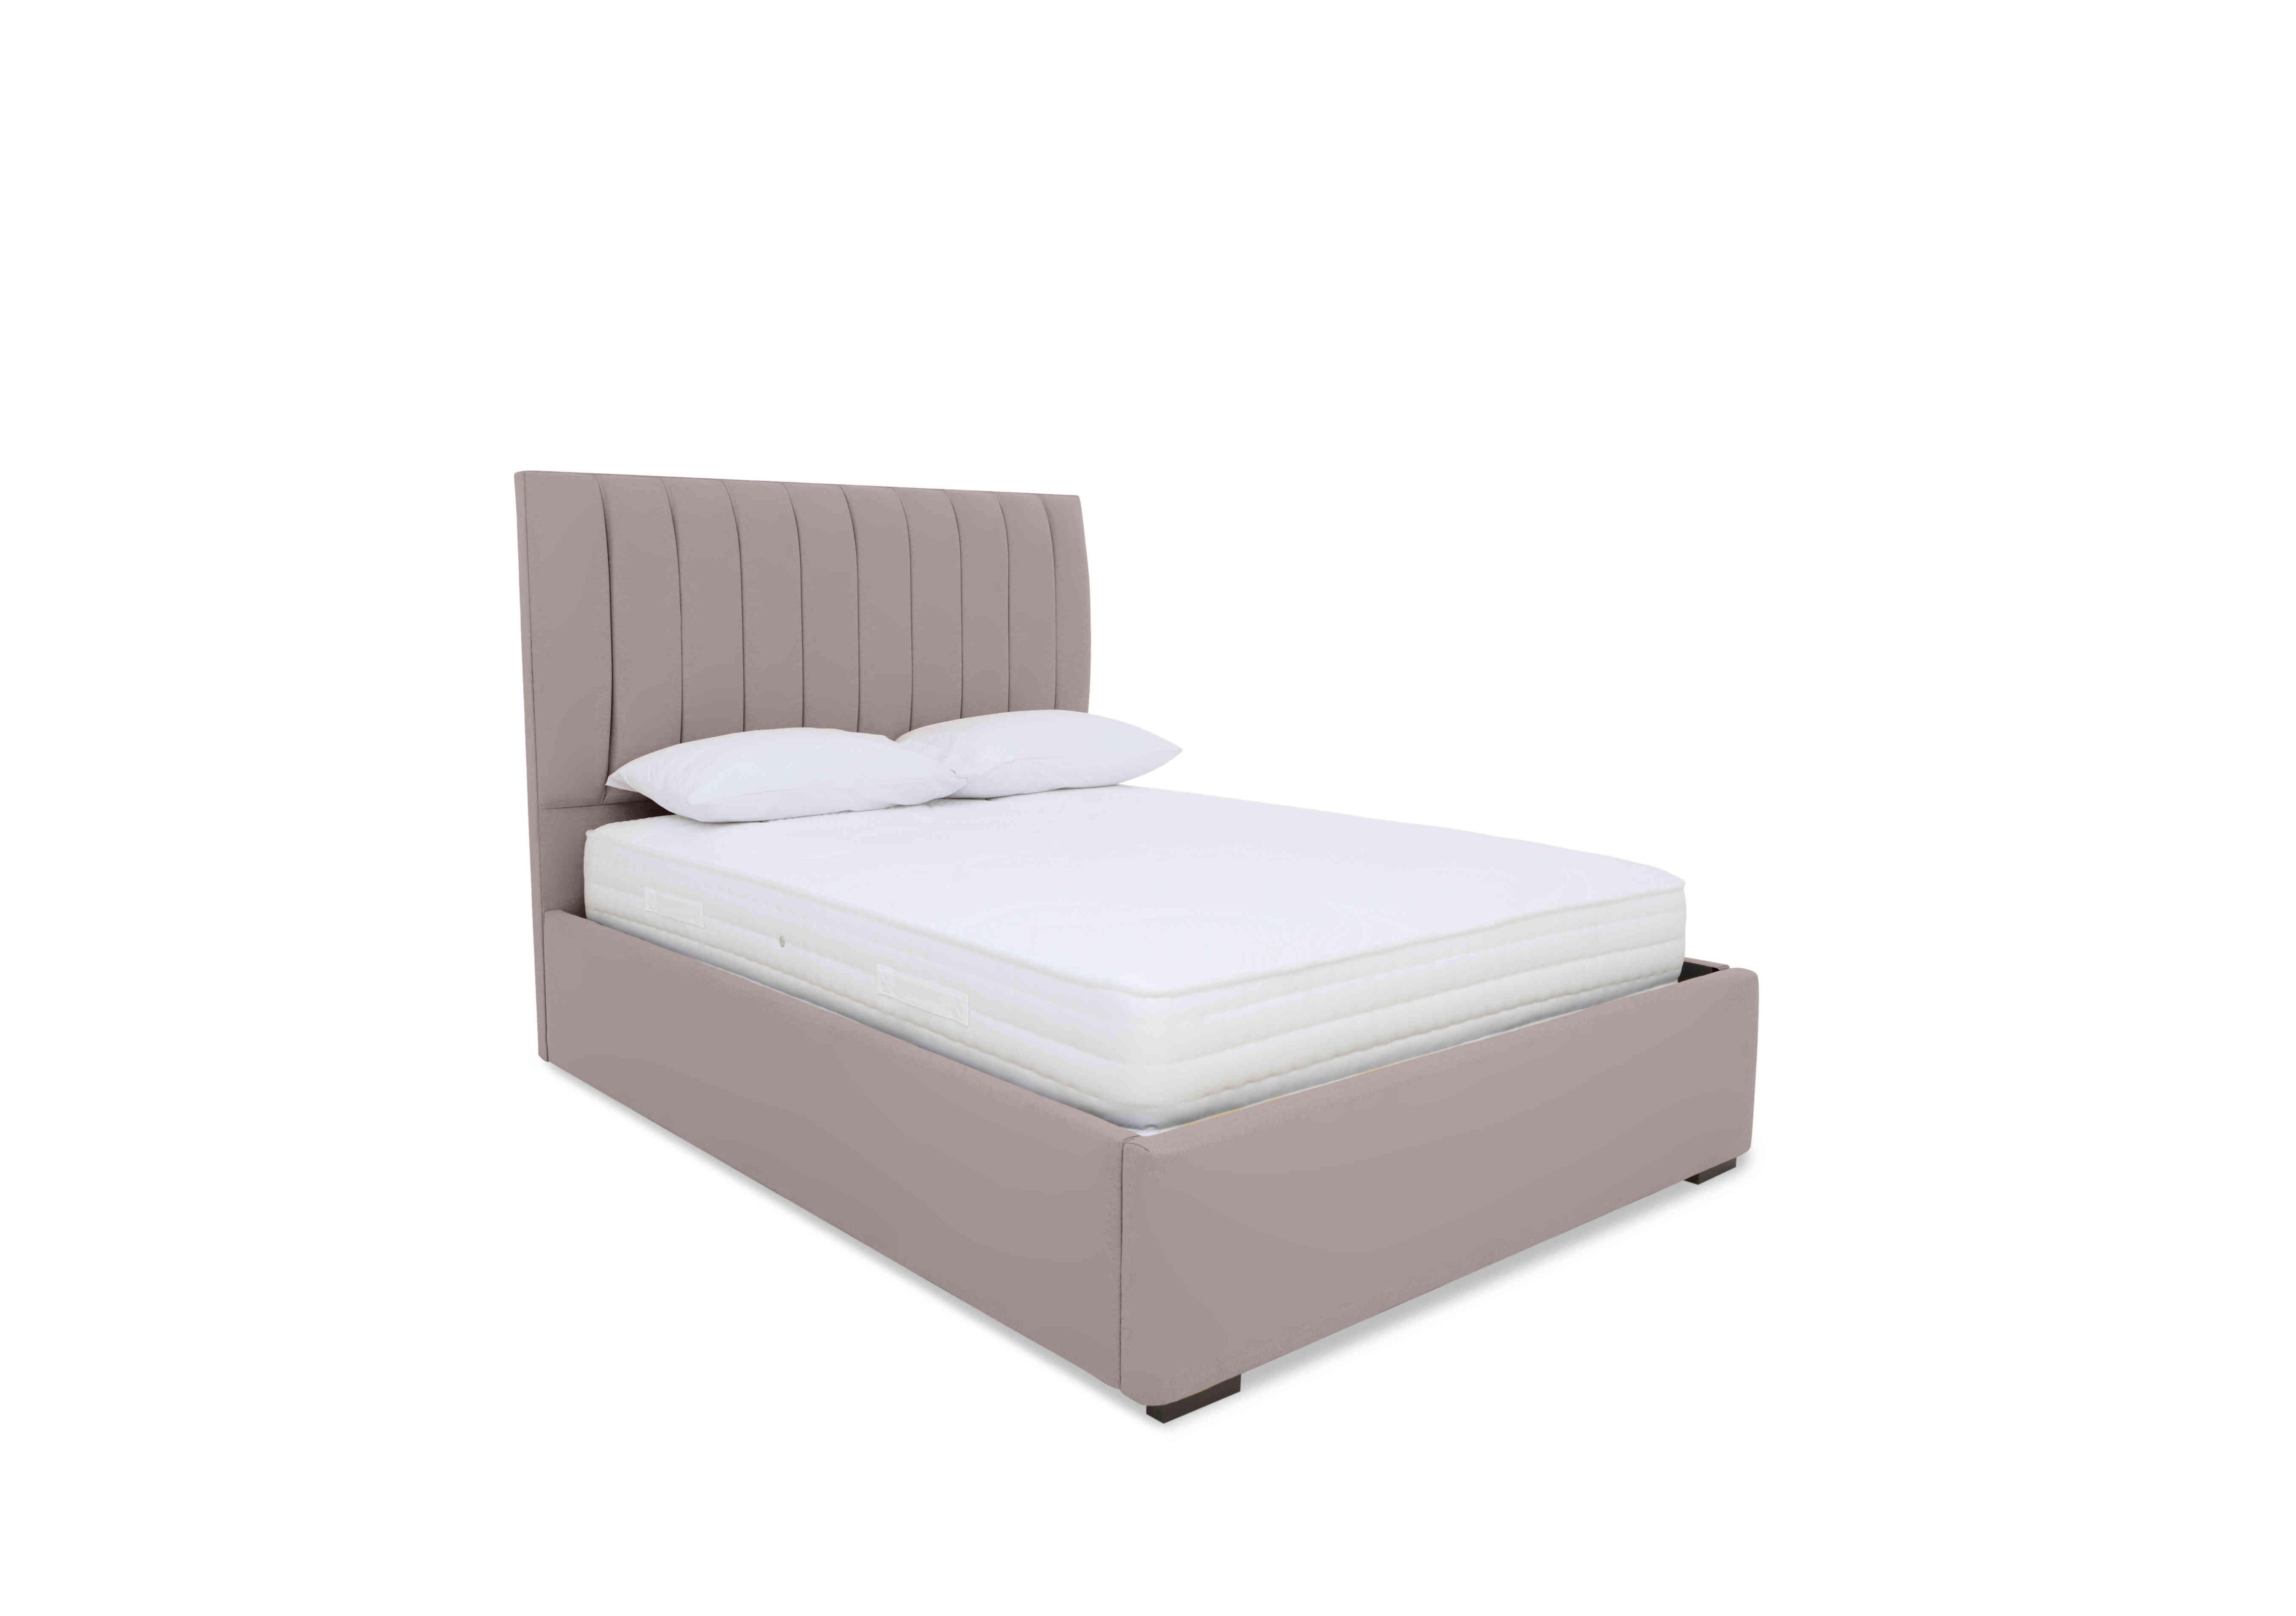 Dickens Ottoman Bed Frame in Plush Lilac on Furniture Village